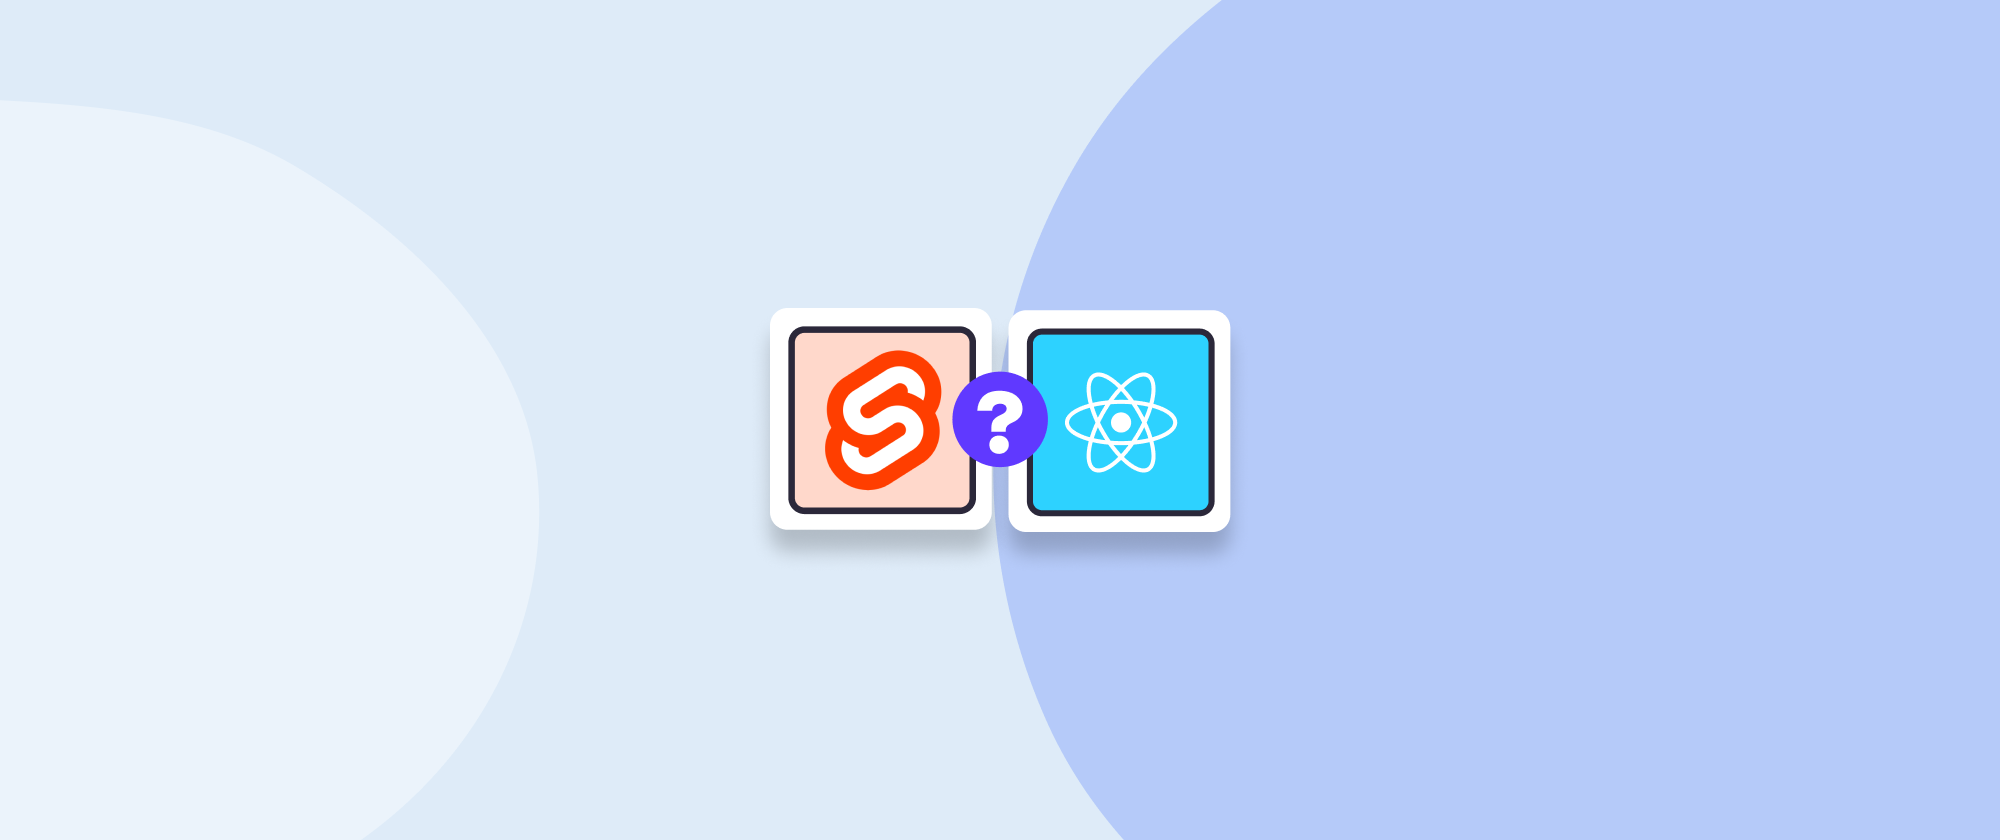 Svelte vs React: Which framework to learn in 2023?